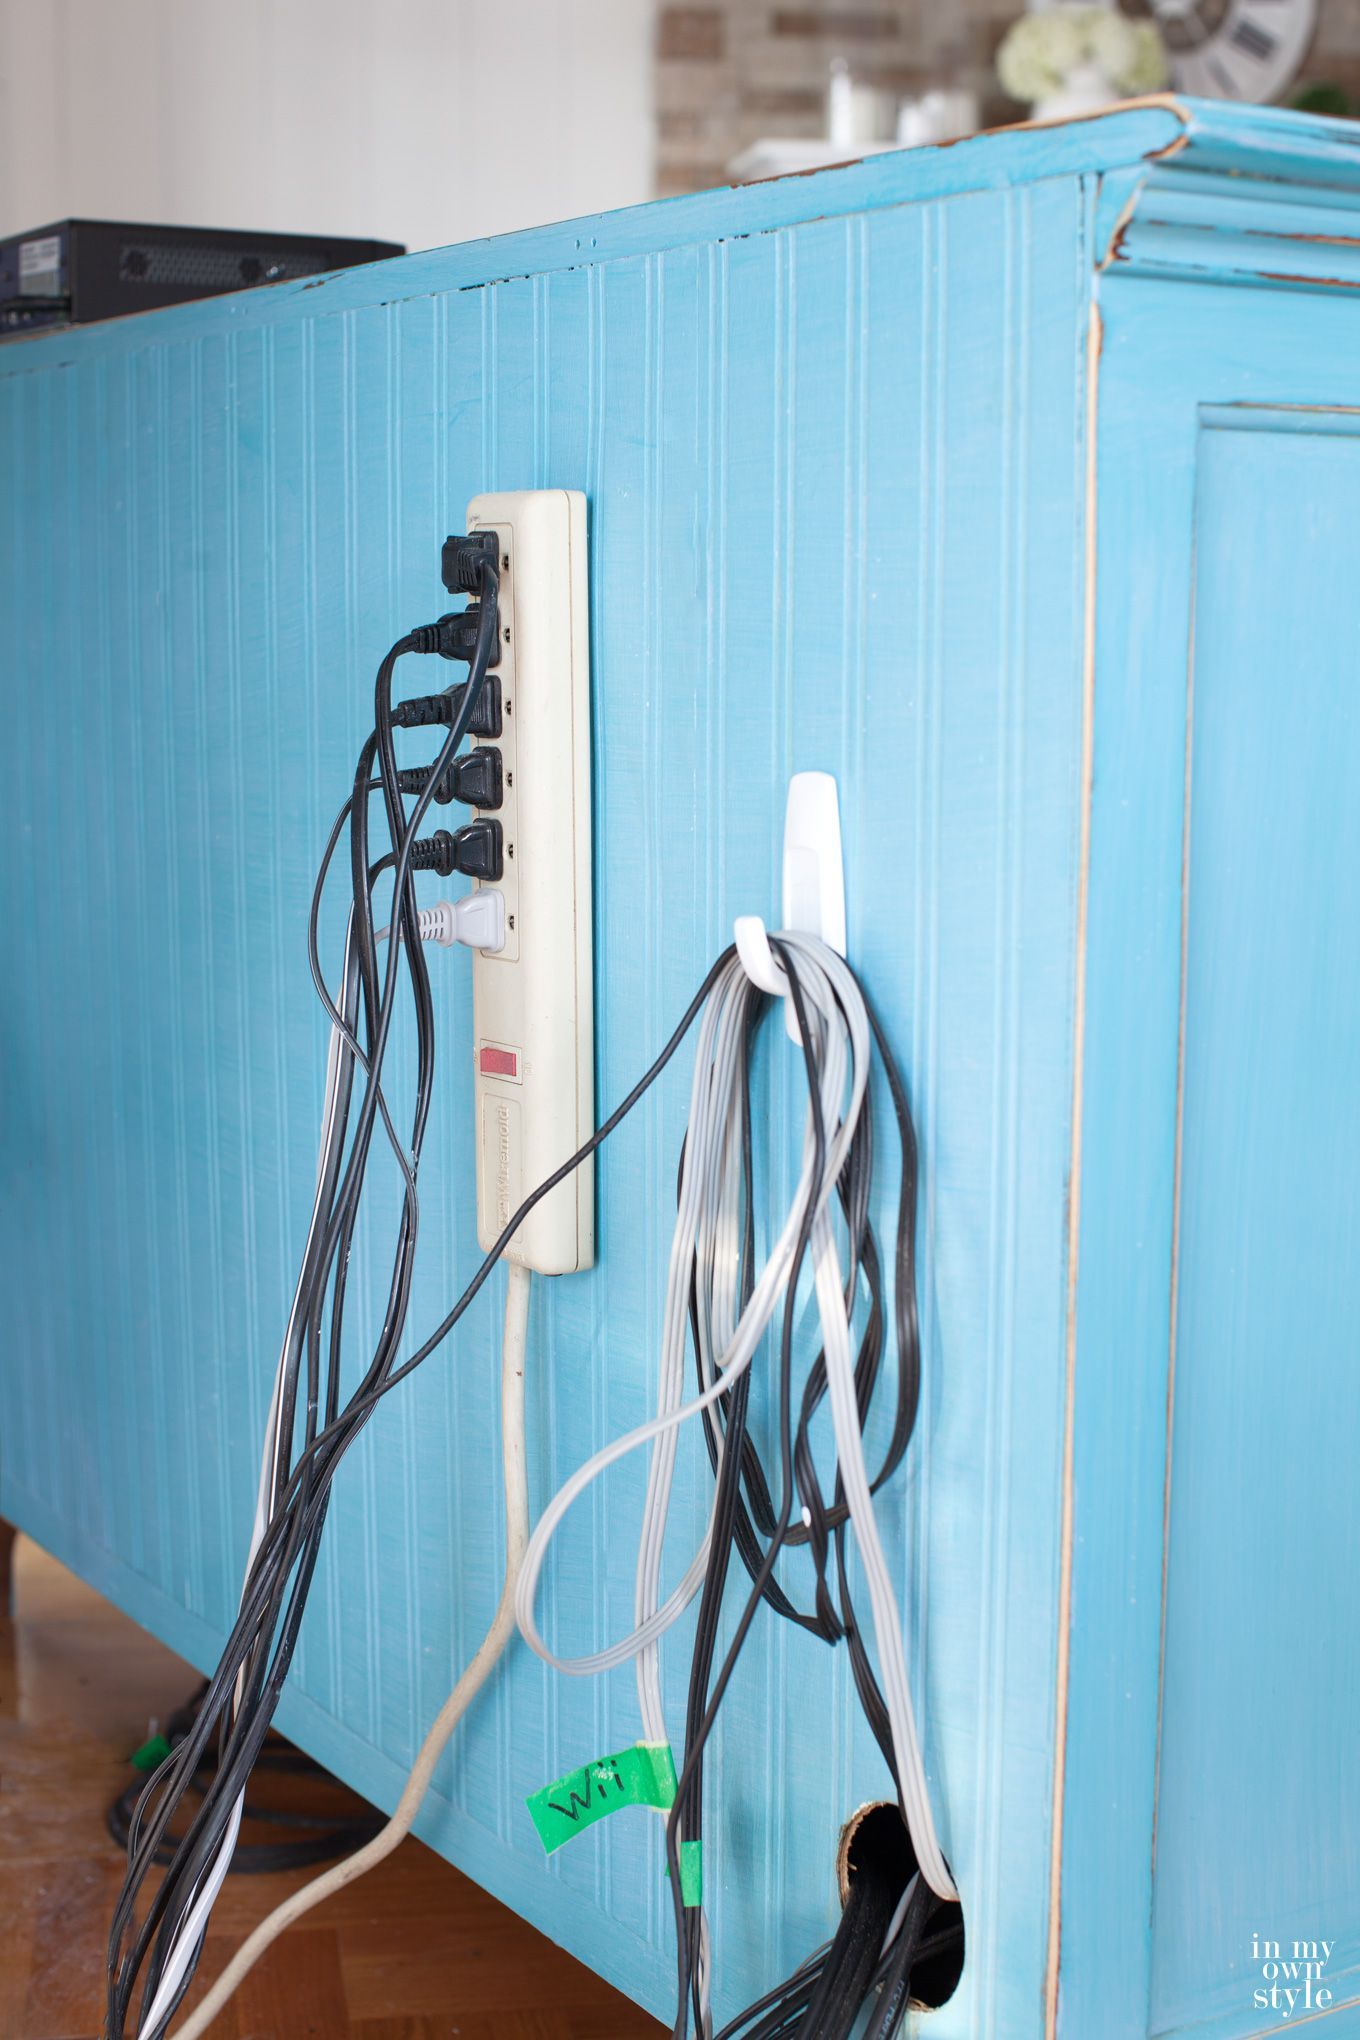 How To Organize Tv Cords So They Are Hidden | Organize Me (View 10 of 30)